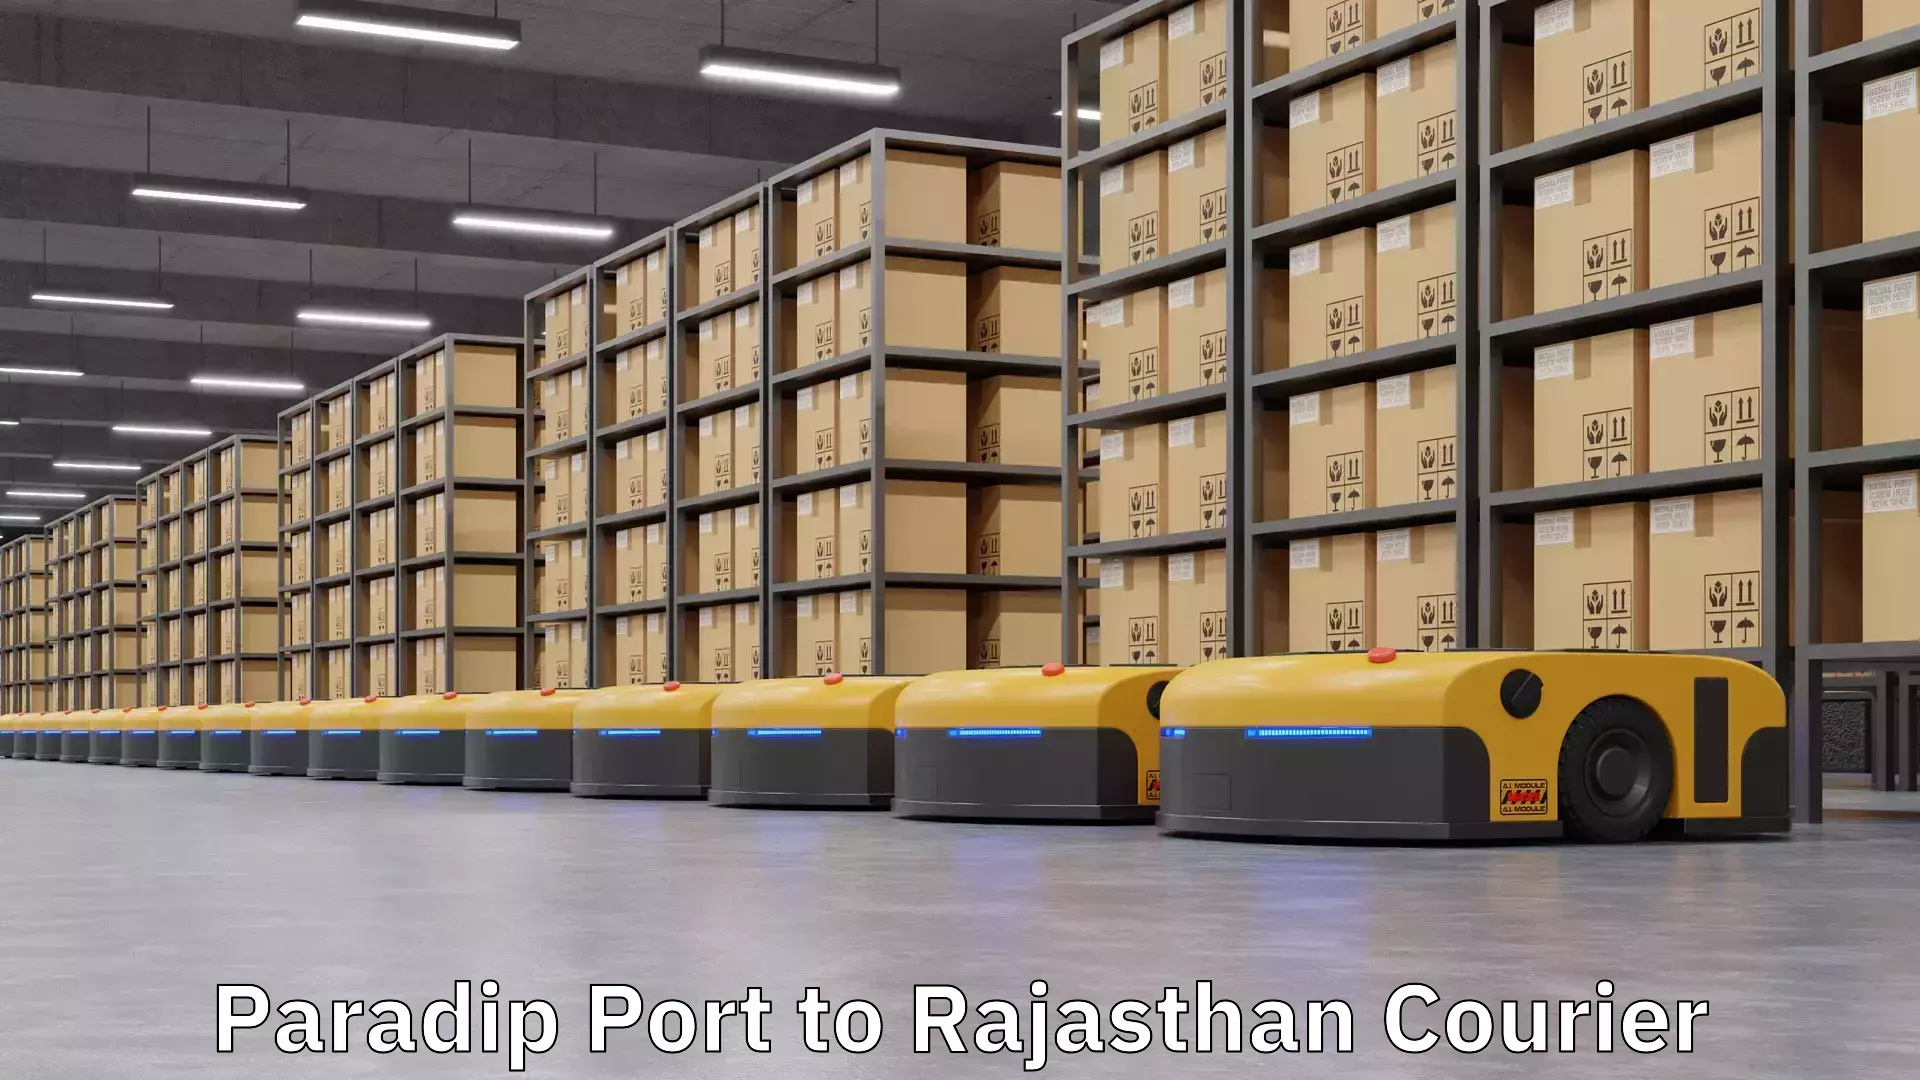 Small business couriers Paradip Port to Rajasthan